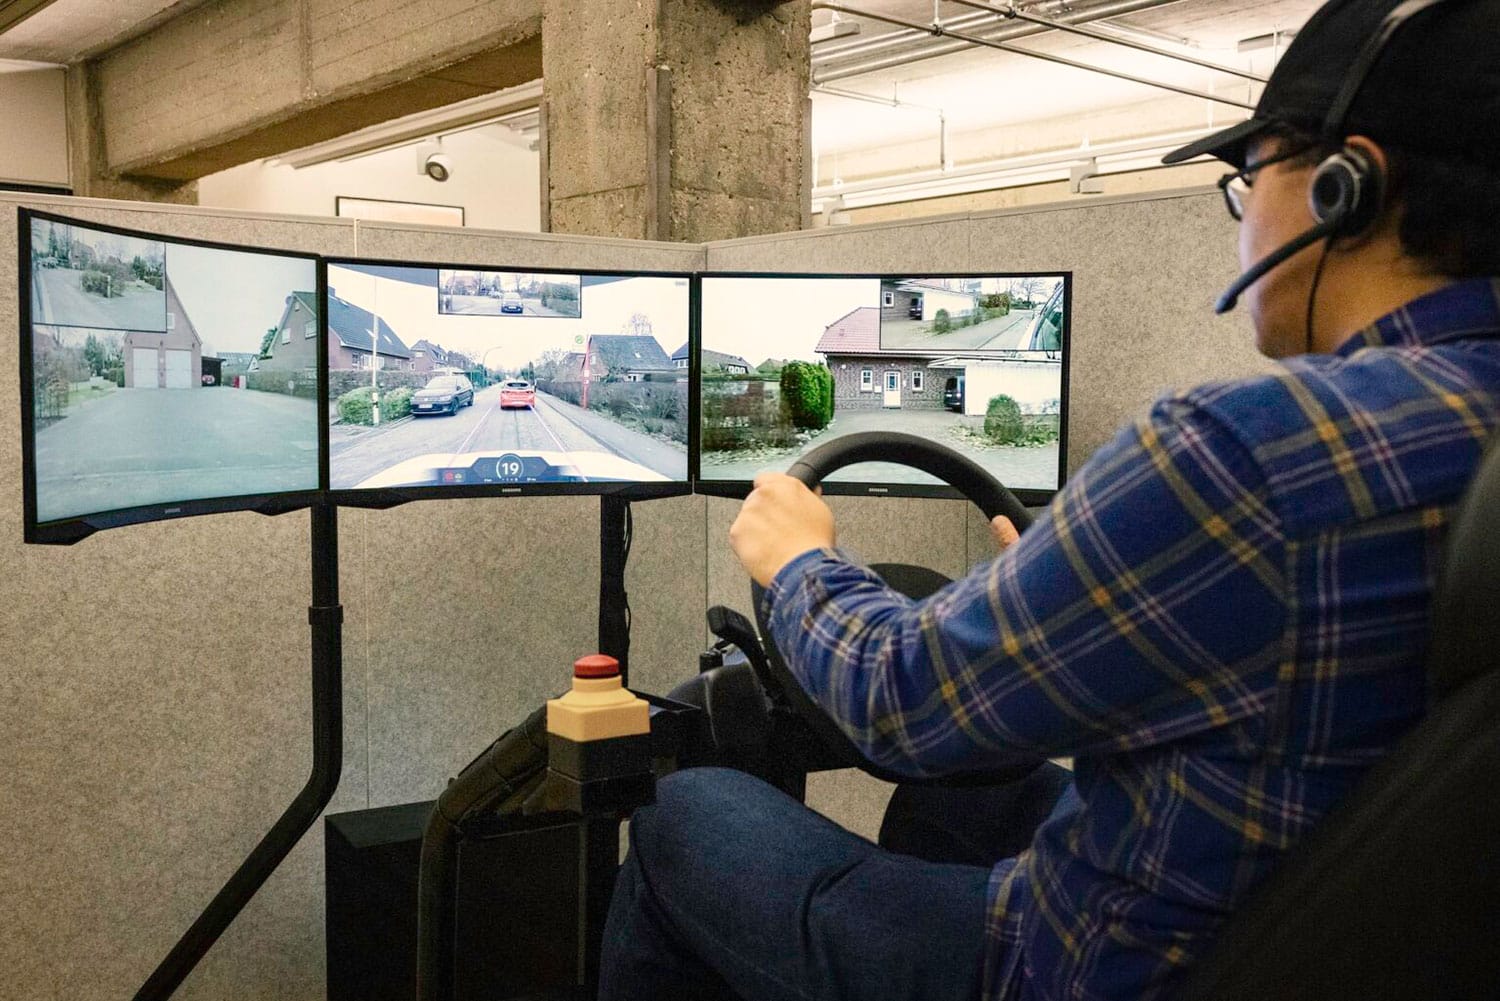 A Vay driver operates a vehicle remotely from a control center that features multiple video feeds. Tele-driving could offer many of the efficiencies that autonomous vehicles are expected to provide, according to research at U-M.